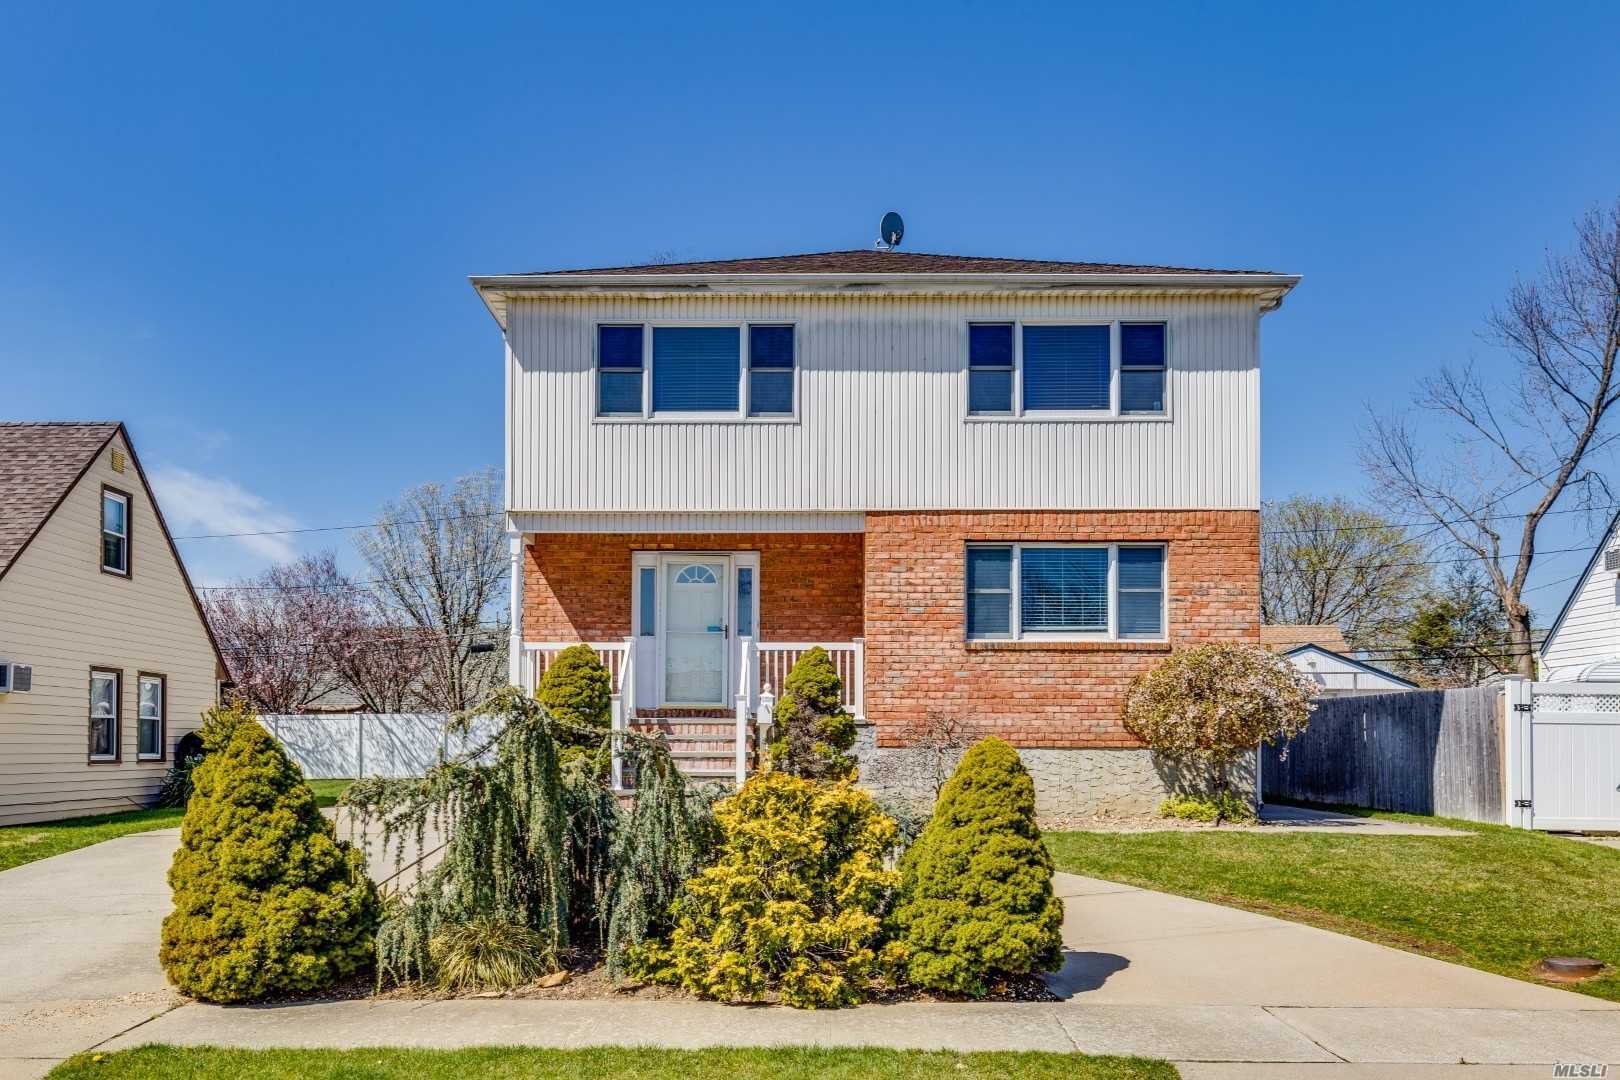 Custom Built In 2003. Rare Opportunity For A Mother And Daughter With Proper Permits. Very Large Rooms. Gas Cooking And Heat, Central Air Conditioning.Interchangeable Lay Out.Newly Painted. First Floor Laundry Room. Lots Of Storage In Basement An Outside Entrance To The Basement.